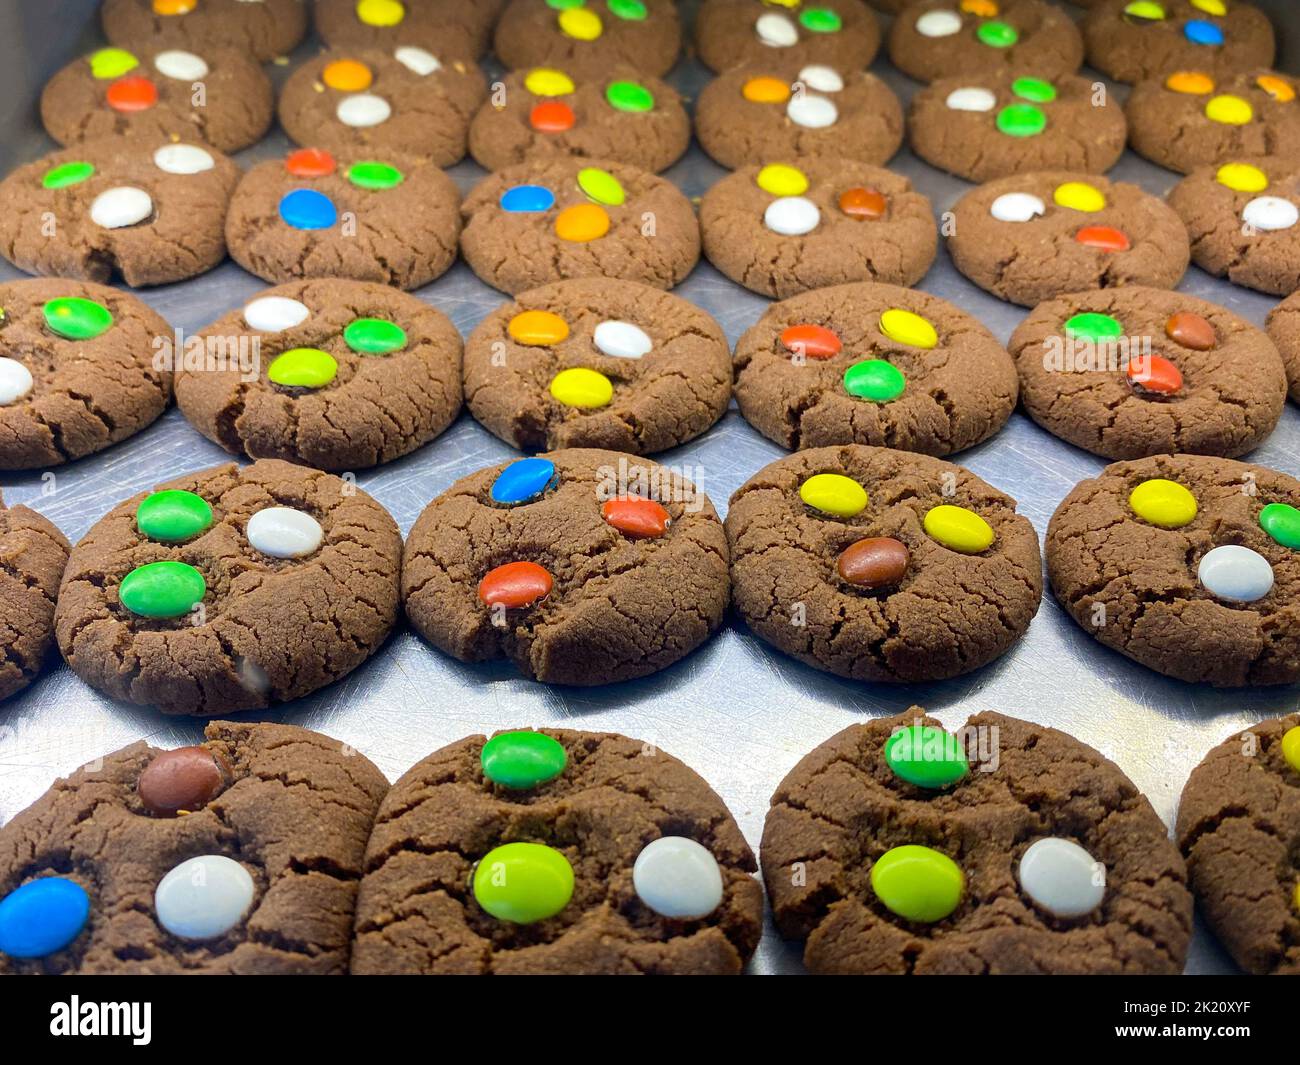 Cookies with colorful candies on them Stock Photo